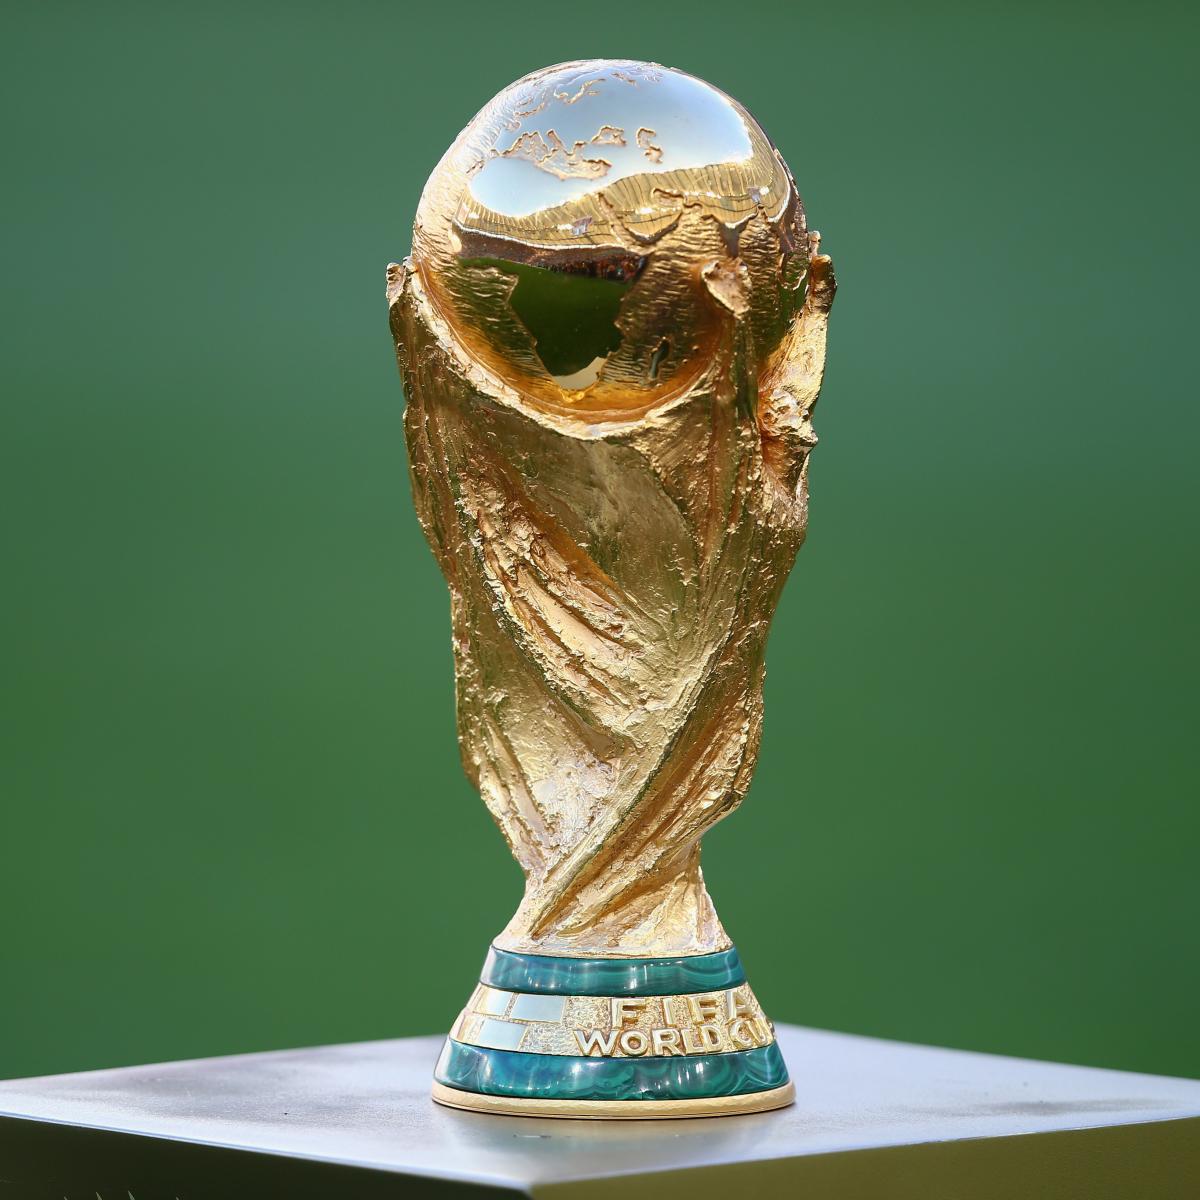 Who will be giving out the World Cup trophy?